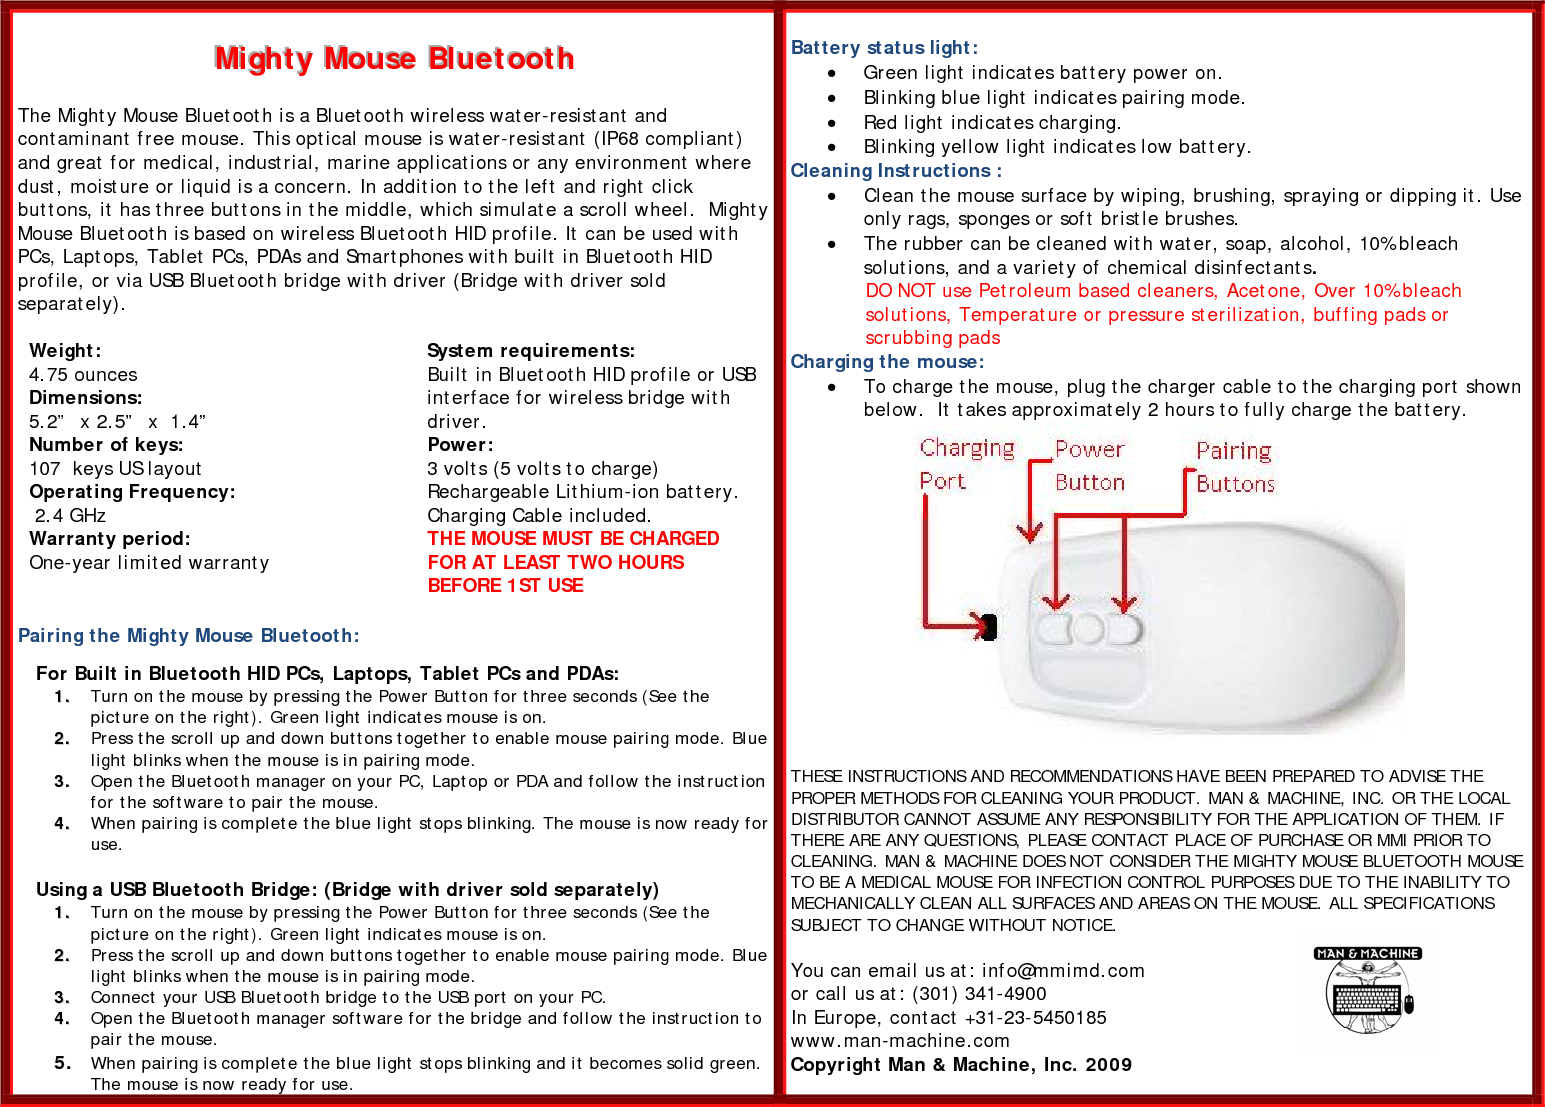 MMMiiiggghhhtttyyy   MMMooouuussseee   BBBllluuueeetttoooooottthhh       The Mighty Mouse Bluetooth is a Bluetooth wireless water-resistant and contaminant free mouse. This optical mouse is water-resistant (IP68 compliant) and great for medical, industrial, marine applications or any environment where dust, moisture or liquid is a concern. In addition to the left and right click buttons, it has three buttons in the middle, which simulate a scroll wheel.  Mighty Mouse Bluetooth is based on wireless Bluetooth HID profile. It can be used with PCs, Laptops, Tablet PCs, PDAs and Smartphones with built in Bluetooth HID profile, or via USB Bluetooth bridge with driver (Bridge with driver sold separately).   Weight: 4.75 ounces Dimensions: 5.2”  x 2.5”  x  1.4” Number of keys: 107  keys US layout  Operating Frequency:  2.4 GHz  Warranty period: One-year limited warranty   System requirements: Built in Bluetooth HID profile or USB interface for wireless bridge with driver. Power: 3 volts (5 volts to charge) Rechargeable Lithium-ion battery. Charging Cable included.  THE MOUSE MUST BE CHARGED FOR AT LEAST TWO HOURS BEFORE 1ST USE  Pairing the Mighty Mouse Bluetooth:      For Built in Bluetooth HID PCs, Laptops, Tablet PCs and PDAs: 11..  Turn on the mouse by pressing the Power Button for three seconds (See the picture on the right). Green light indicates mouse is on. 22..  Press the scroll up and down buttons together to enable mouse pairing mode. Blue light blinks when the mouse is in pairing mode.  33..  Open the Bluetooth manager on your PC, Laptop or PDA and follow the instruction for the software to pair the mouse.  44..  When pairing is complete the blue light stops blinking. The mouse is now ready for use.      Using a USB Bluetooth Bridge: (Bridge with driver sold separately) 11..  Turn on the mouse by pressing the Power Button for three seconds (See the picture on the right). Green light indicates mouse is on. 22..  Press the scroll up and down buttons together to enable mouse pairing mode. Blue light blinks when the mouse is in pairing mode.  33..  Connect your USB Bluetooth bridge to the USB port on your PC. 44..  Open the Bluetooth manager software for the bridge and follow the instruction to pair the mouse.   55..  When pairing is complete the blue light stops blinking and it becomes solid green. The mouse is now ready for use.  Battery status light: • Green light indicates battery power on.  • Blinking blue light indicates pairing mode. • Red light indicates charging.  • Blinking yellow light indicates low battery. Cleaning Instructions : • Clean the mouse surface by wiping, brushing, spraying or dipping it. Use only rags, sponges or soft bristle brushes.  • The rubber can be cleaned with water, soap, alcohol, 10% bleach solutions, and a variety of chemical disinfectants.  DO NOT use Petroleum based cleaners, Acetone, Over 10% bleach solutions, Temperature or pressure sterilization, buffing pads or  scrubbing pads Charging the mouse: • To charge the mouse, plug the charger cable to the charging port shown below.  It takes approximately 2 hours to fully charge the battery.   THESE INSTRUCTIONS AND RECOMMENDATIONS HAVE BEEN PREPARED TO ADVISE THE PROPER METHODS FOR CLEANING YOUR PRODUCT. MAN &amp; MACHINE, INC. OR THE LOCAL DISTRIBUTOR CANNOT ASSUME ANY RESPONSIBILITY FOR THE APPLICATION OF THEM. IF THERE ARE ANY QUESTIONS, PLEASE CONTACT PLACE OF PURCHASE OR MMI PRIOR TO CLEANING. MAN &amp; MACHINE DOES NOT CONSIDER THE MIGHTY MOUSE BLUETOOTH MOUSE TO BE A MEDICAL MOUSE FOR INFECTION CONTROL PURPOSES DUE TO THE INABILITY TO MECHANICALLY CLEAN ALL SURFACES AND AREAS ON THE MOUSE. ALL SPECIFICATIONS SUBJECT TO CHANGE WITHOUT NOTICE.  You can email us at: info@mmimd.com  or call us at: (301) 341-4900 In Europe, contact +31-23-5450185 www.man-machine.com  Copyright Man &amp; Machine, Inc. 2009  